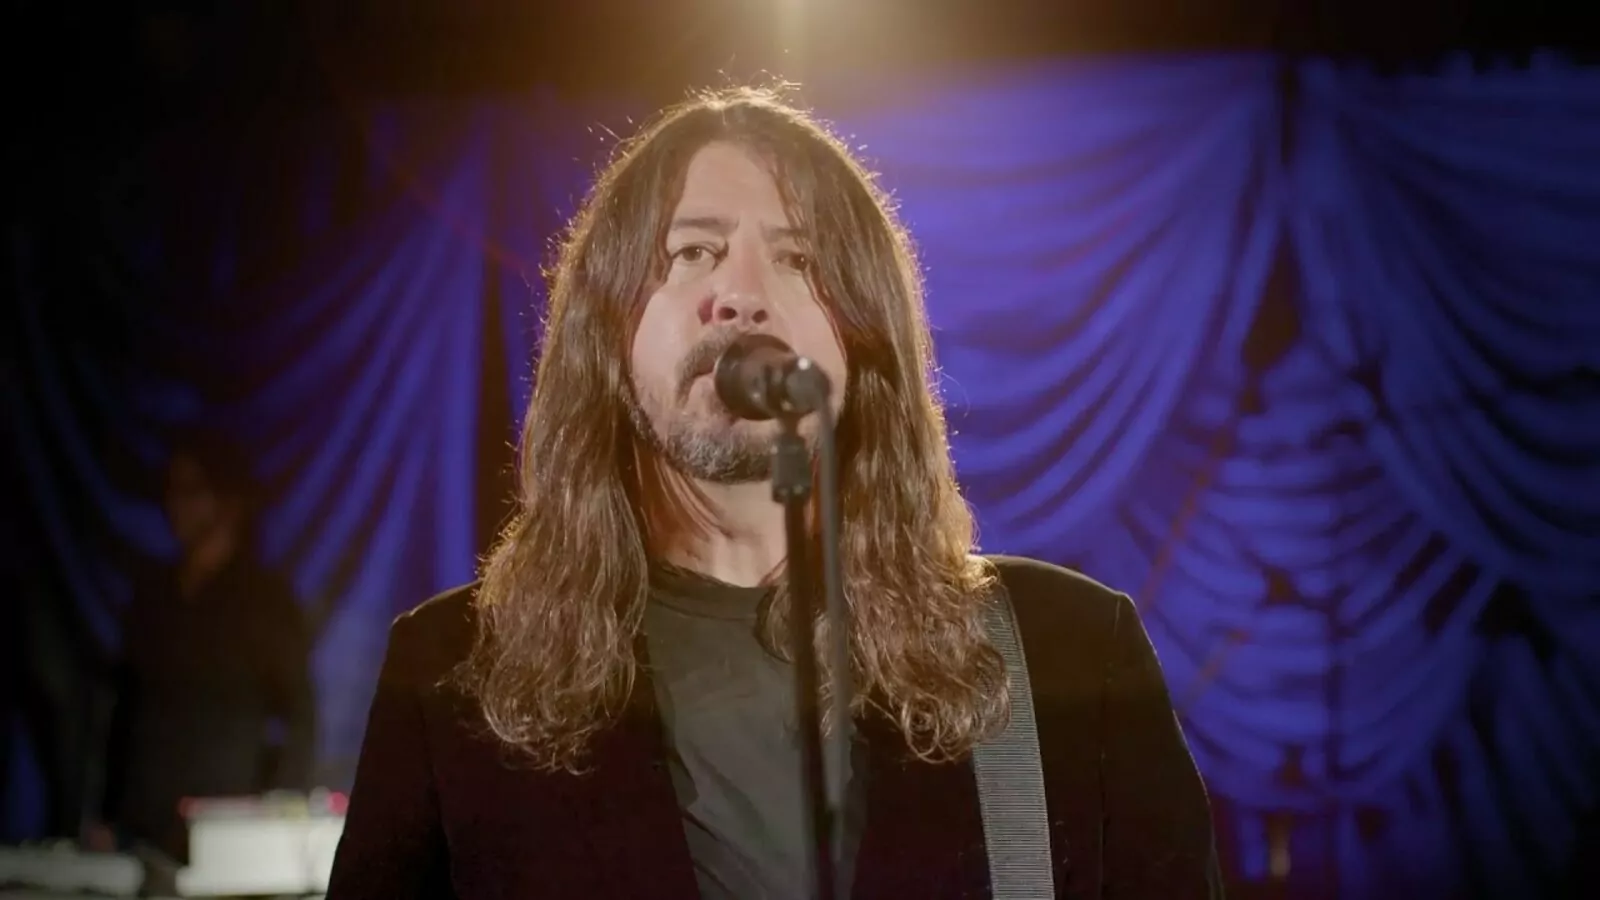 The 12 Songs That Dave Grohl Picks His Favorites